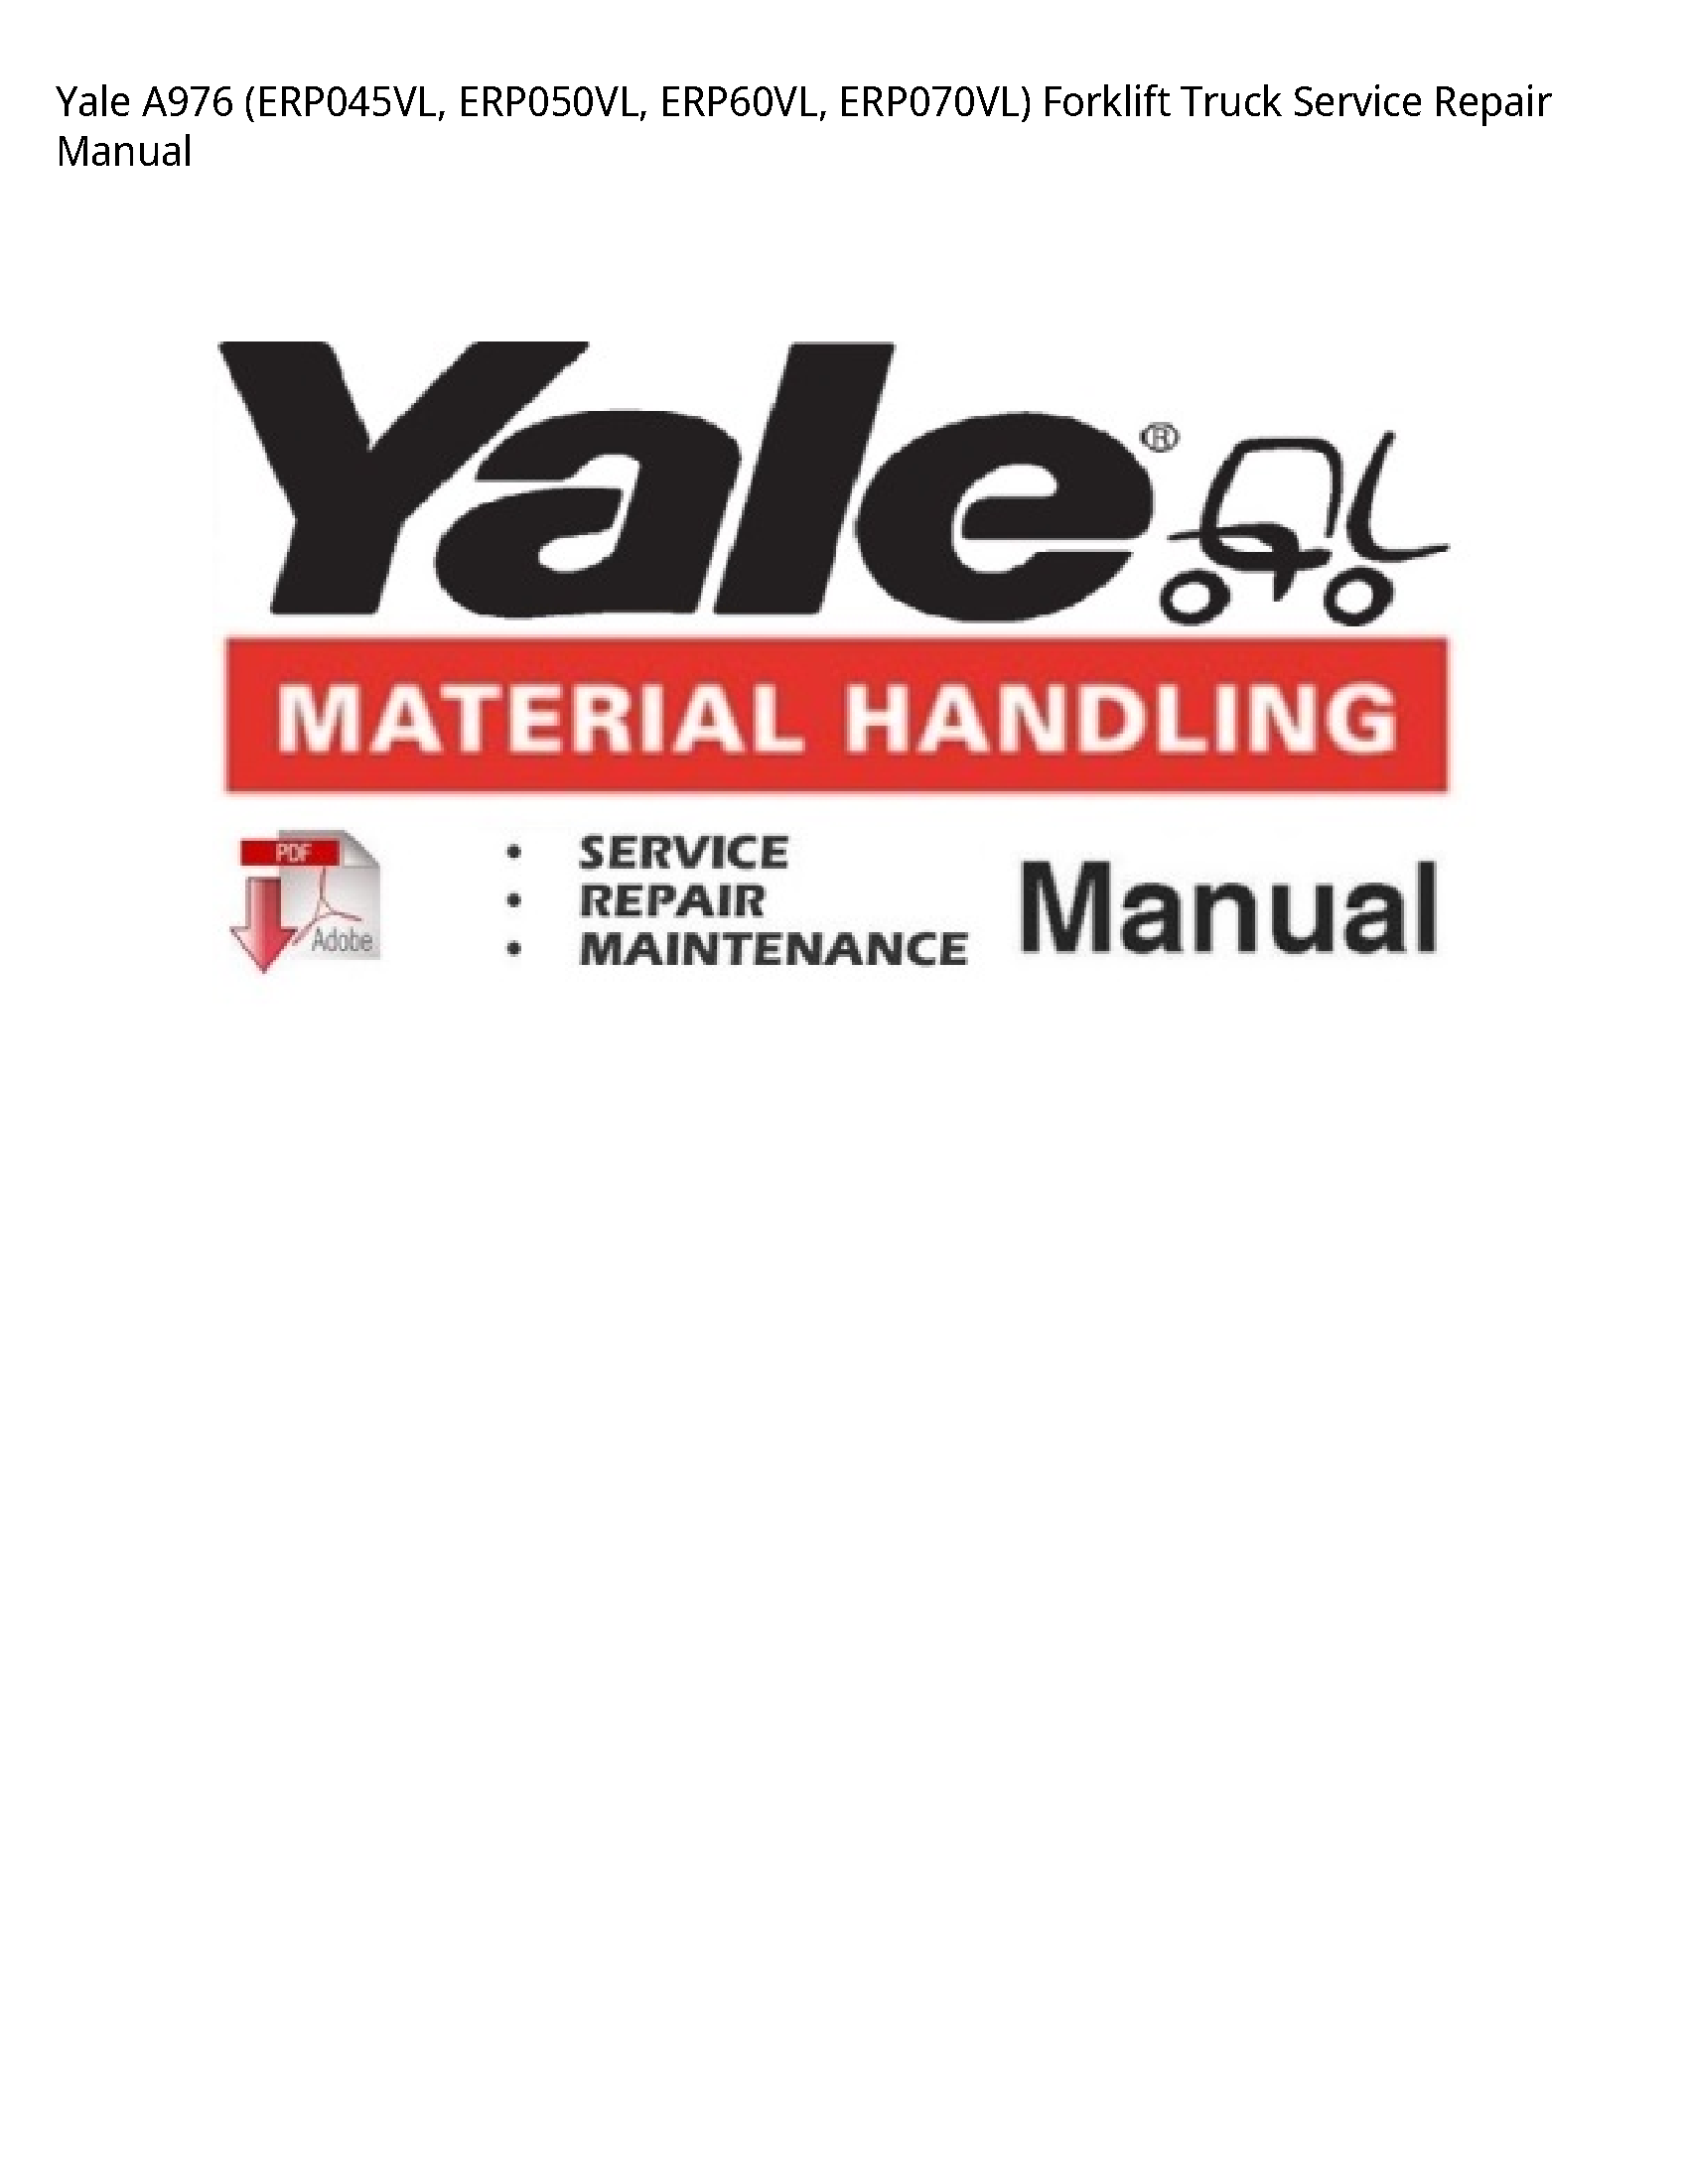 Yale A976 Forklift Truck manual